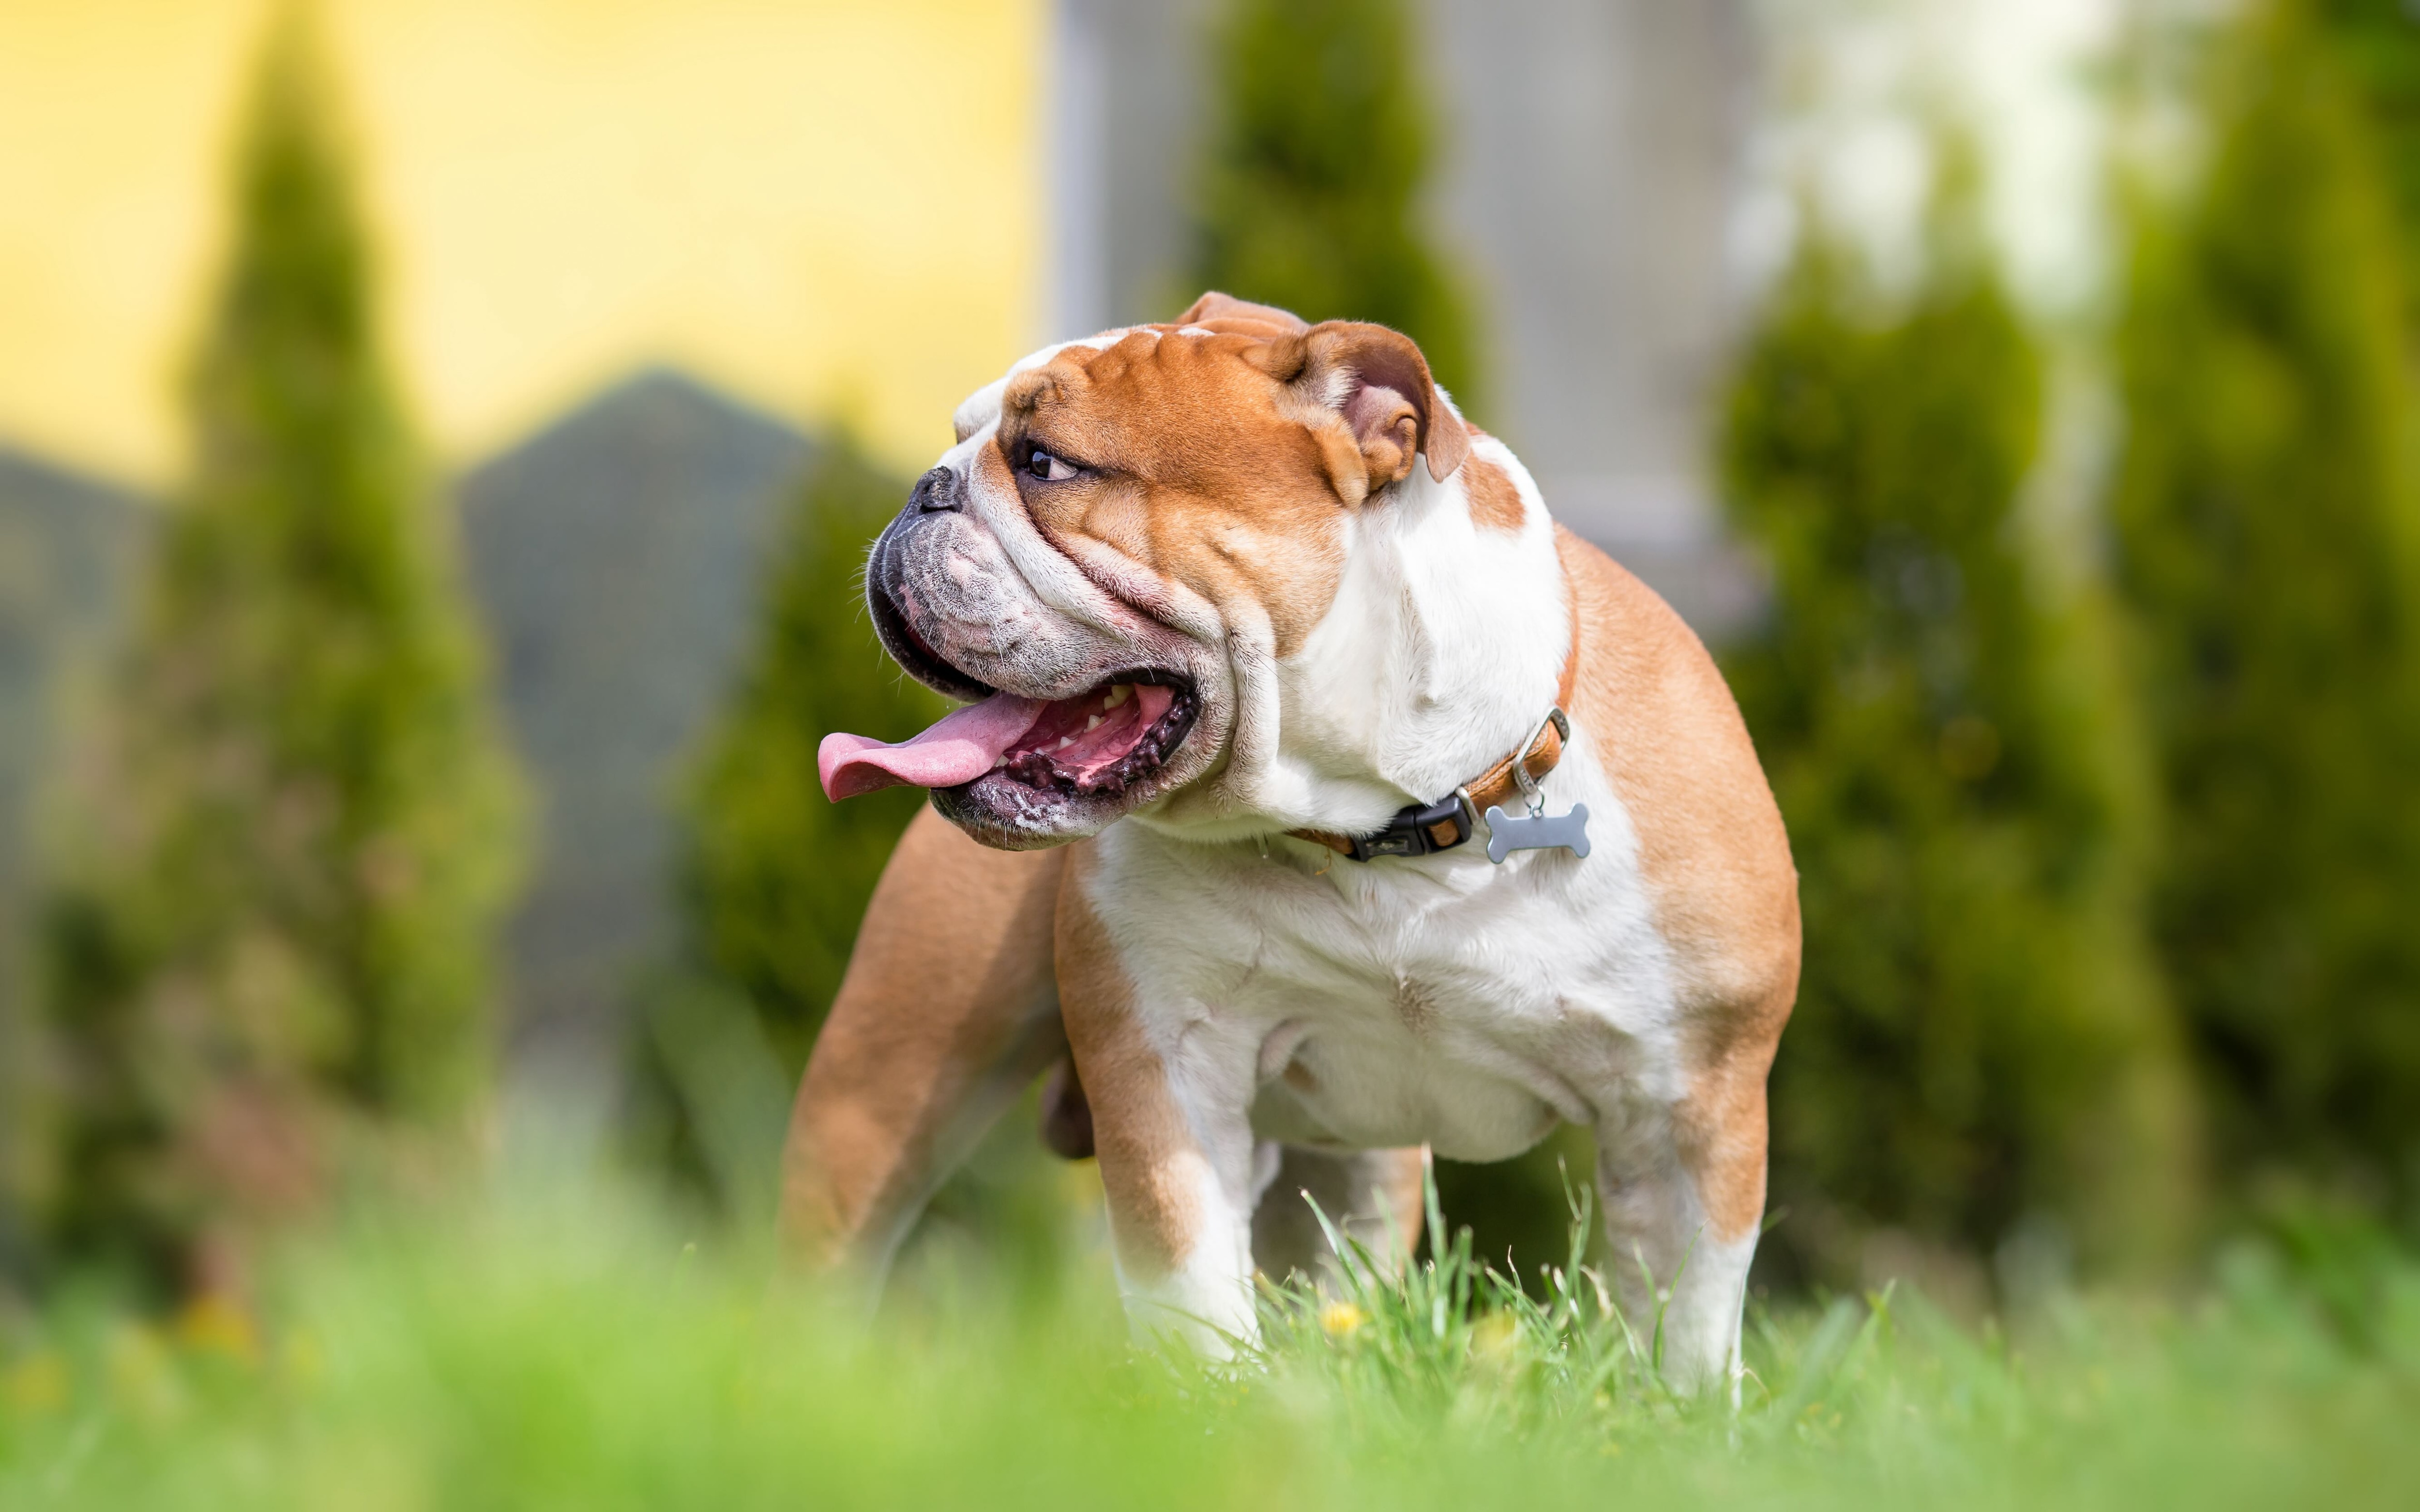 tan and white english bulldog standing in grass and panting